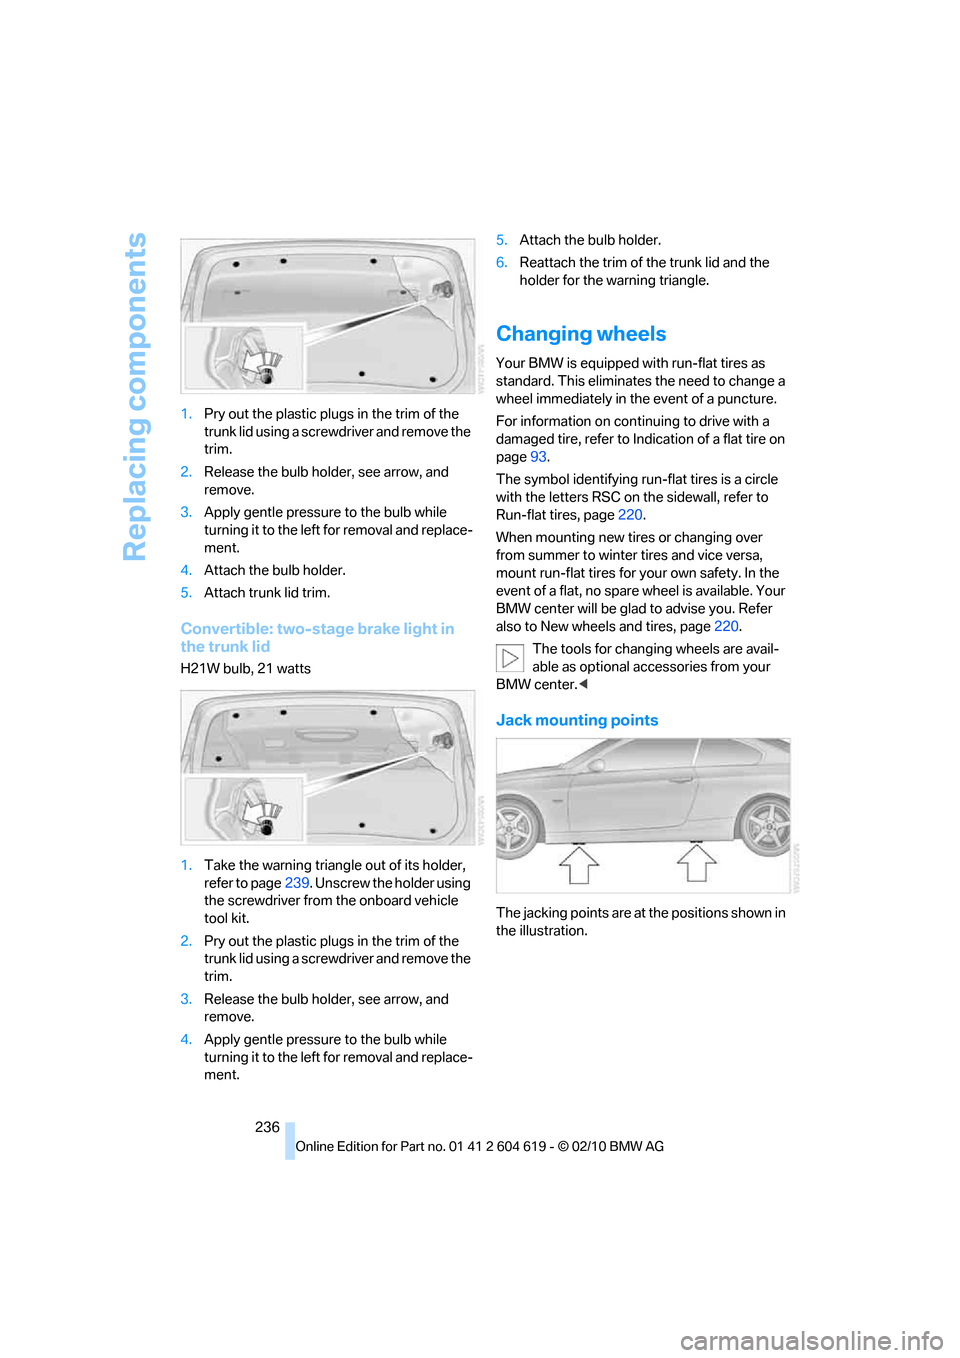 BMW 328I XDRIVE CONVERTIBLE 2011 E94 Owners Manual Replacing components
236 1.Pry out the plastic plugs in the trim of the 
trunk lid using a screwdriver and remove the 
trim.
2.Release the bulb holder, see arrow, and 
remove.
3.Apply gentle pressure 